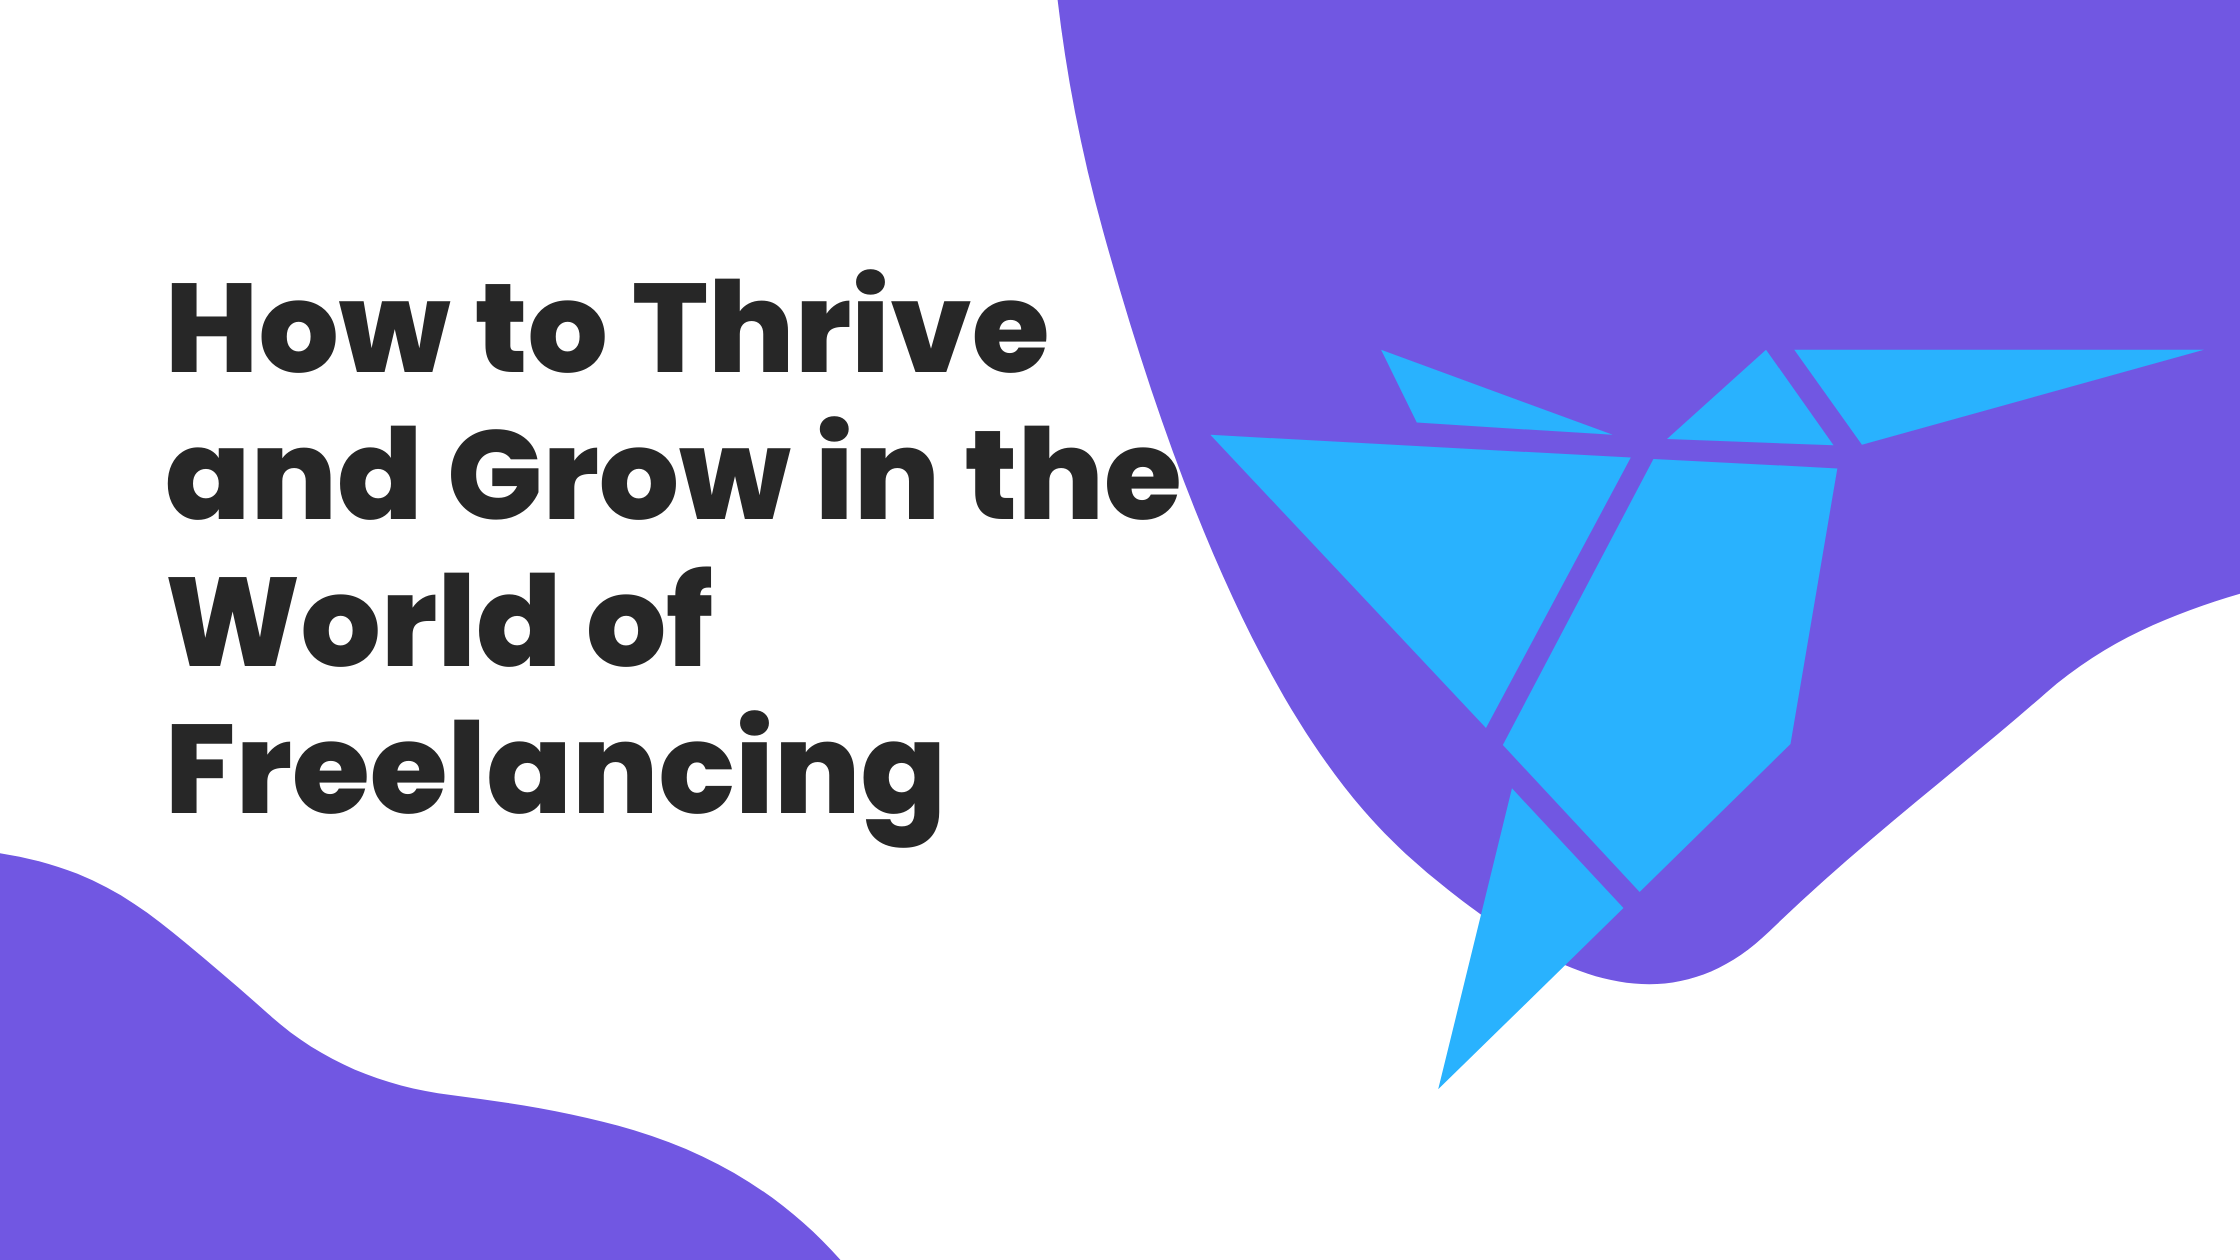 How to Thrive and Grow in the World of Freelancing